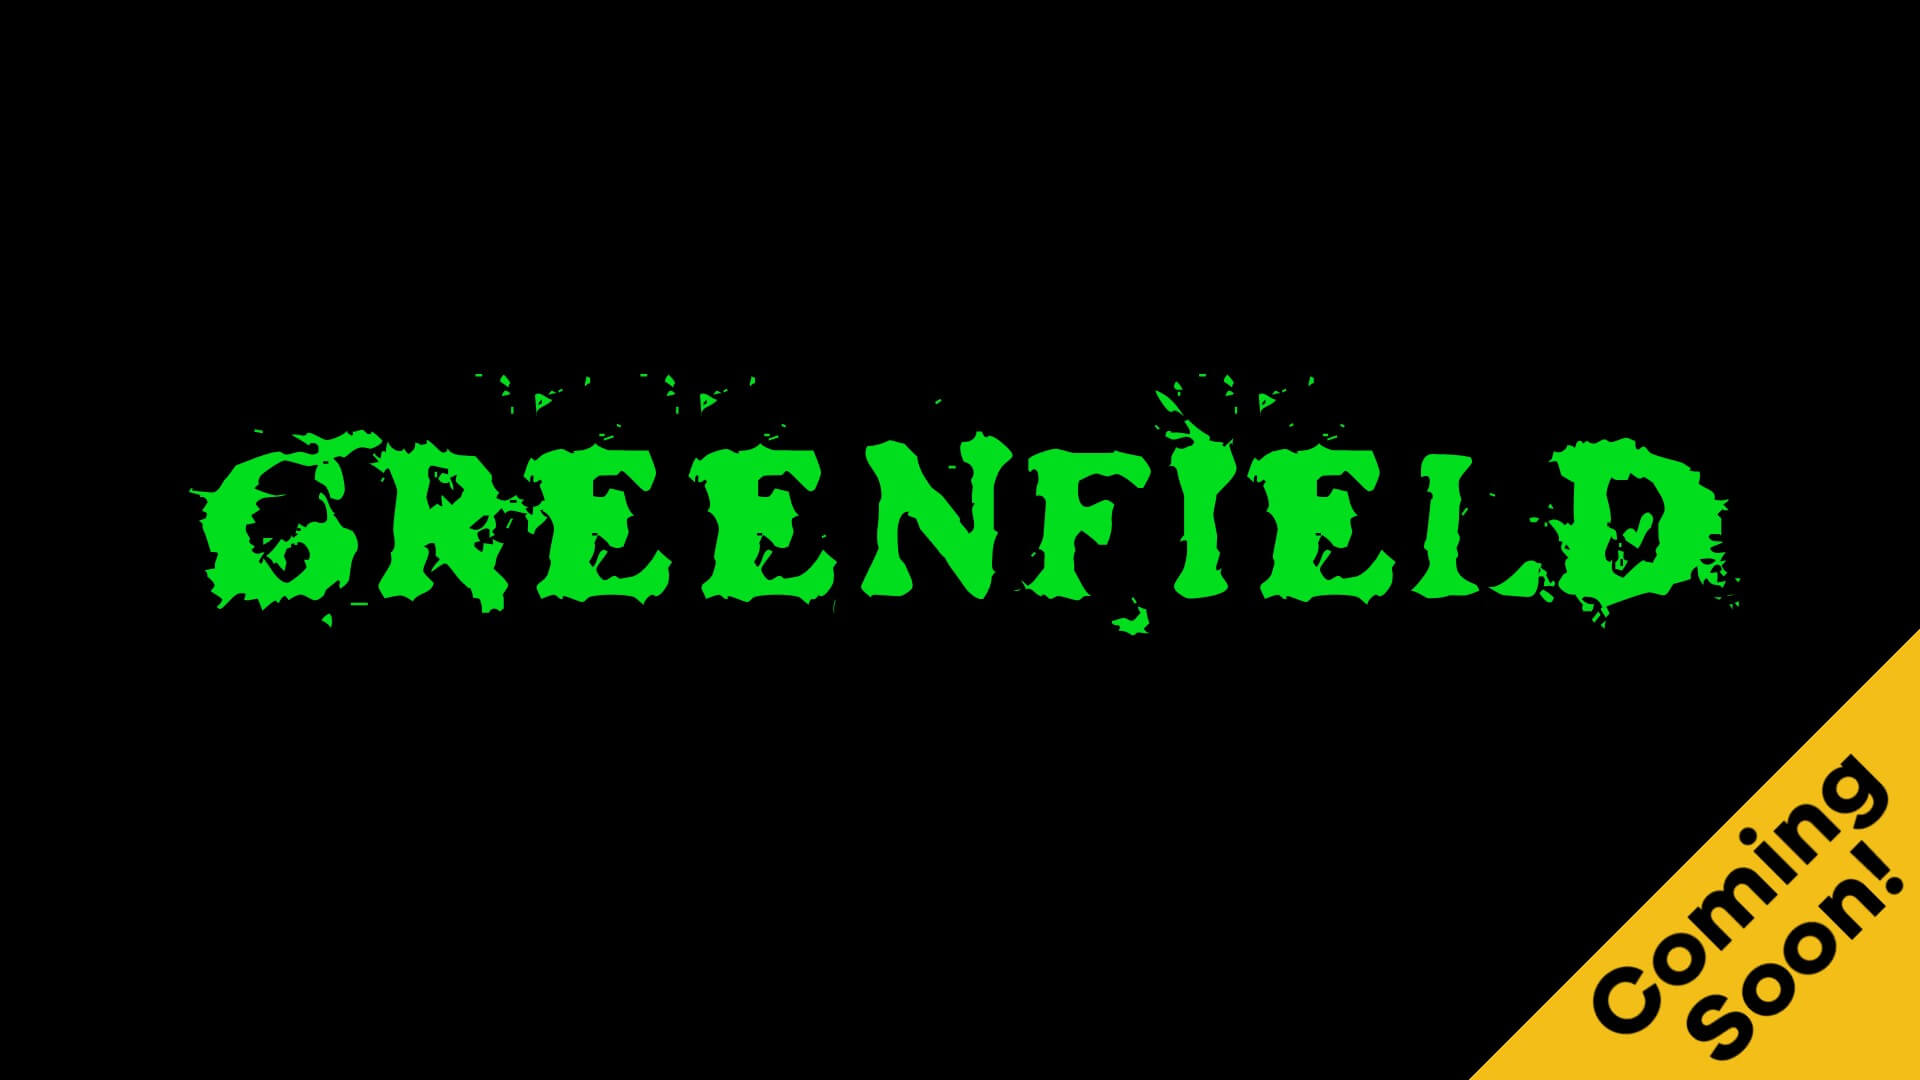 Greenfield poster